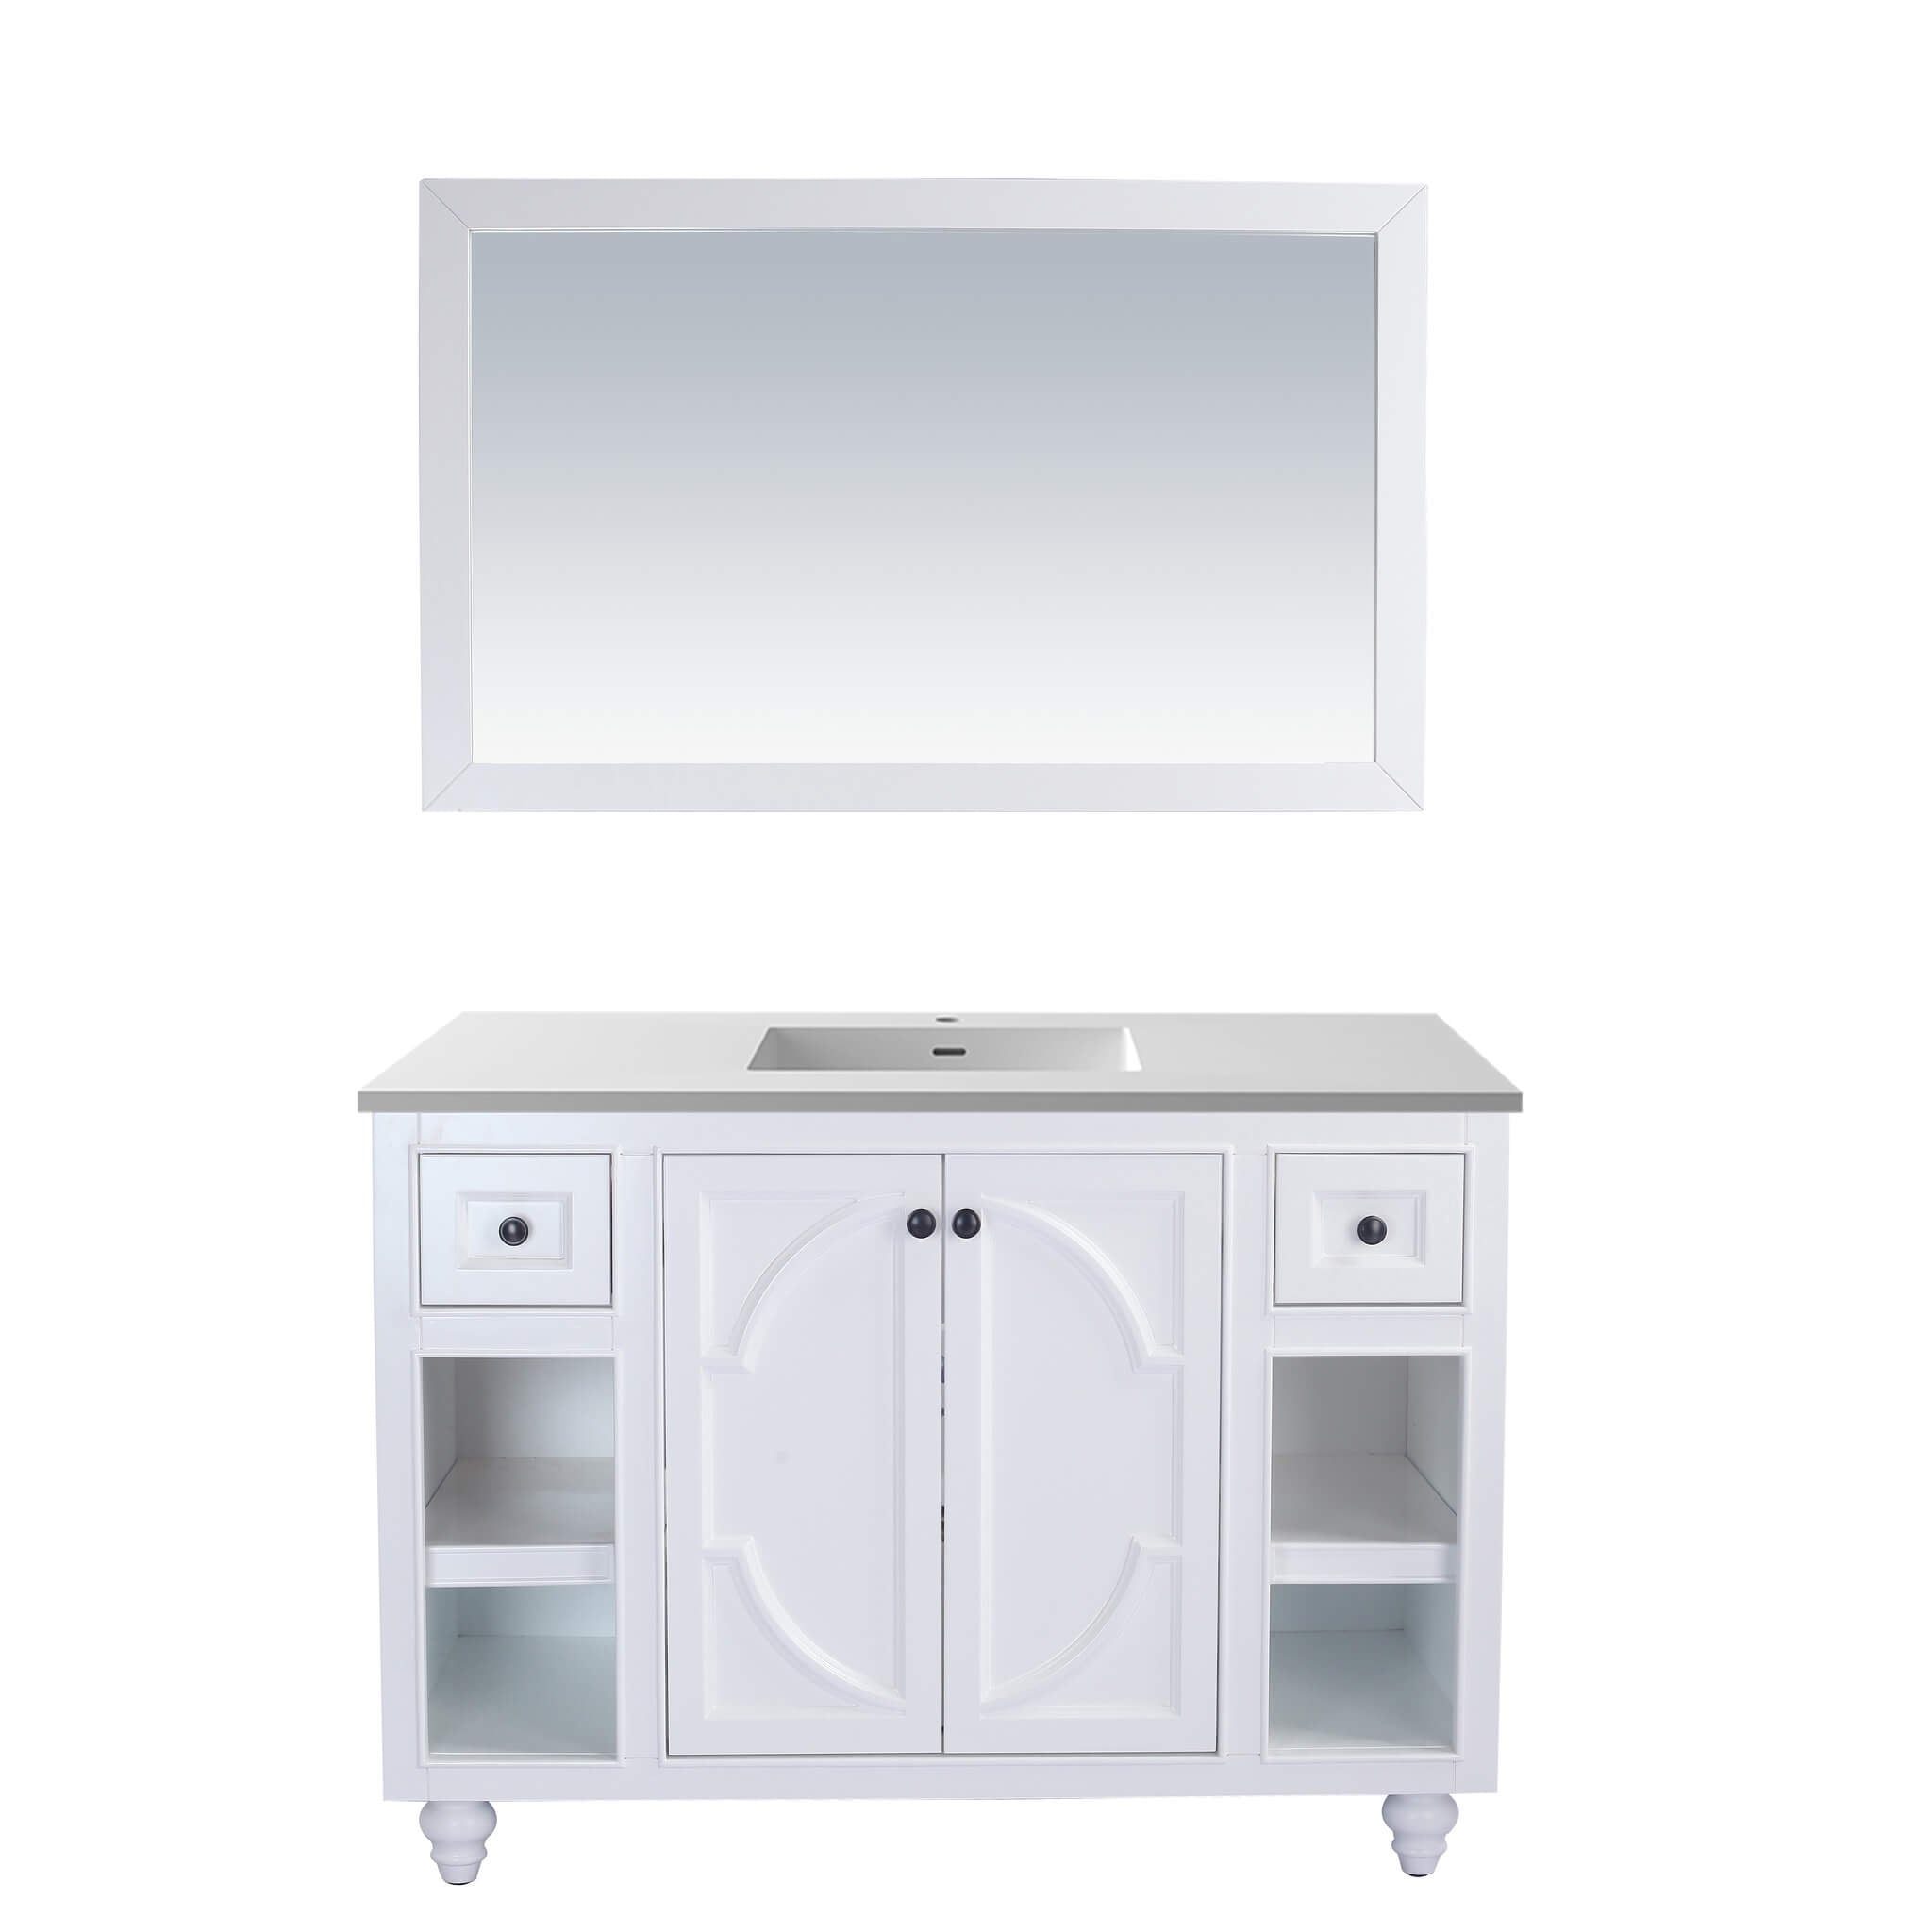 LAVIVA Odyssey 313613-48W-MW 48" Single Bathroom Vanity in White with Matte White VIVA Stone Surface, Integrated Sink, Front View